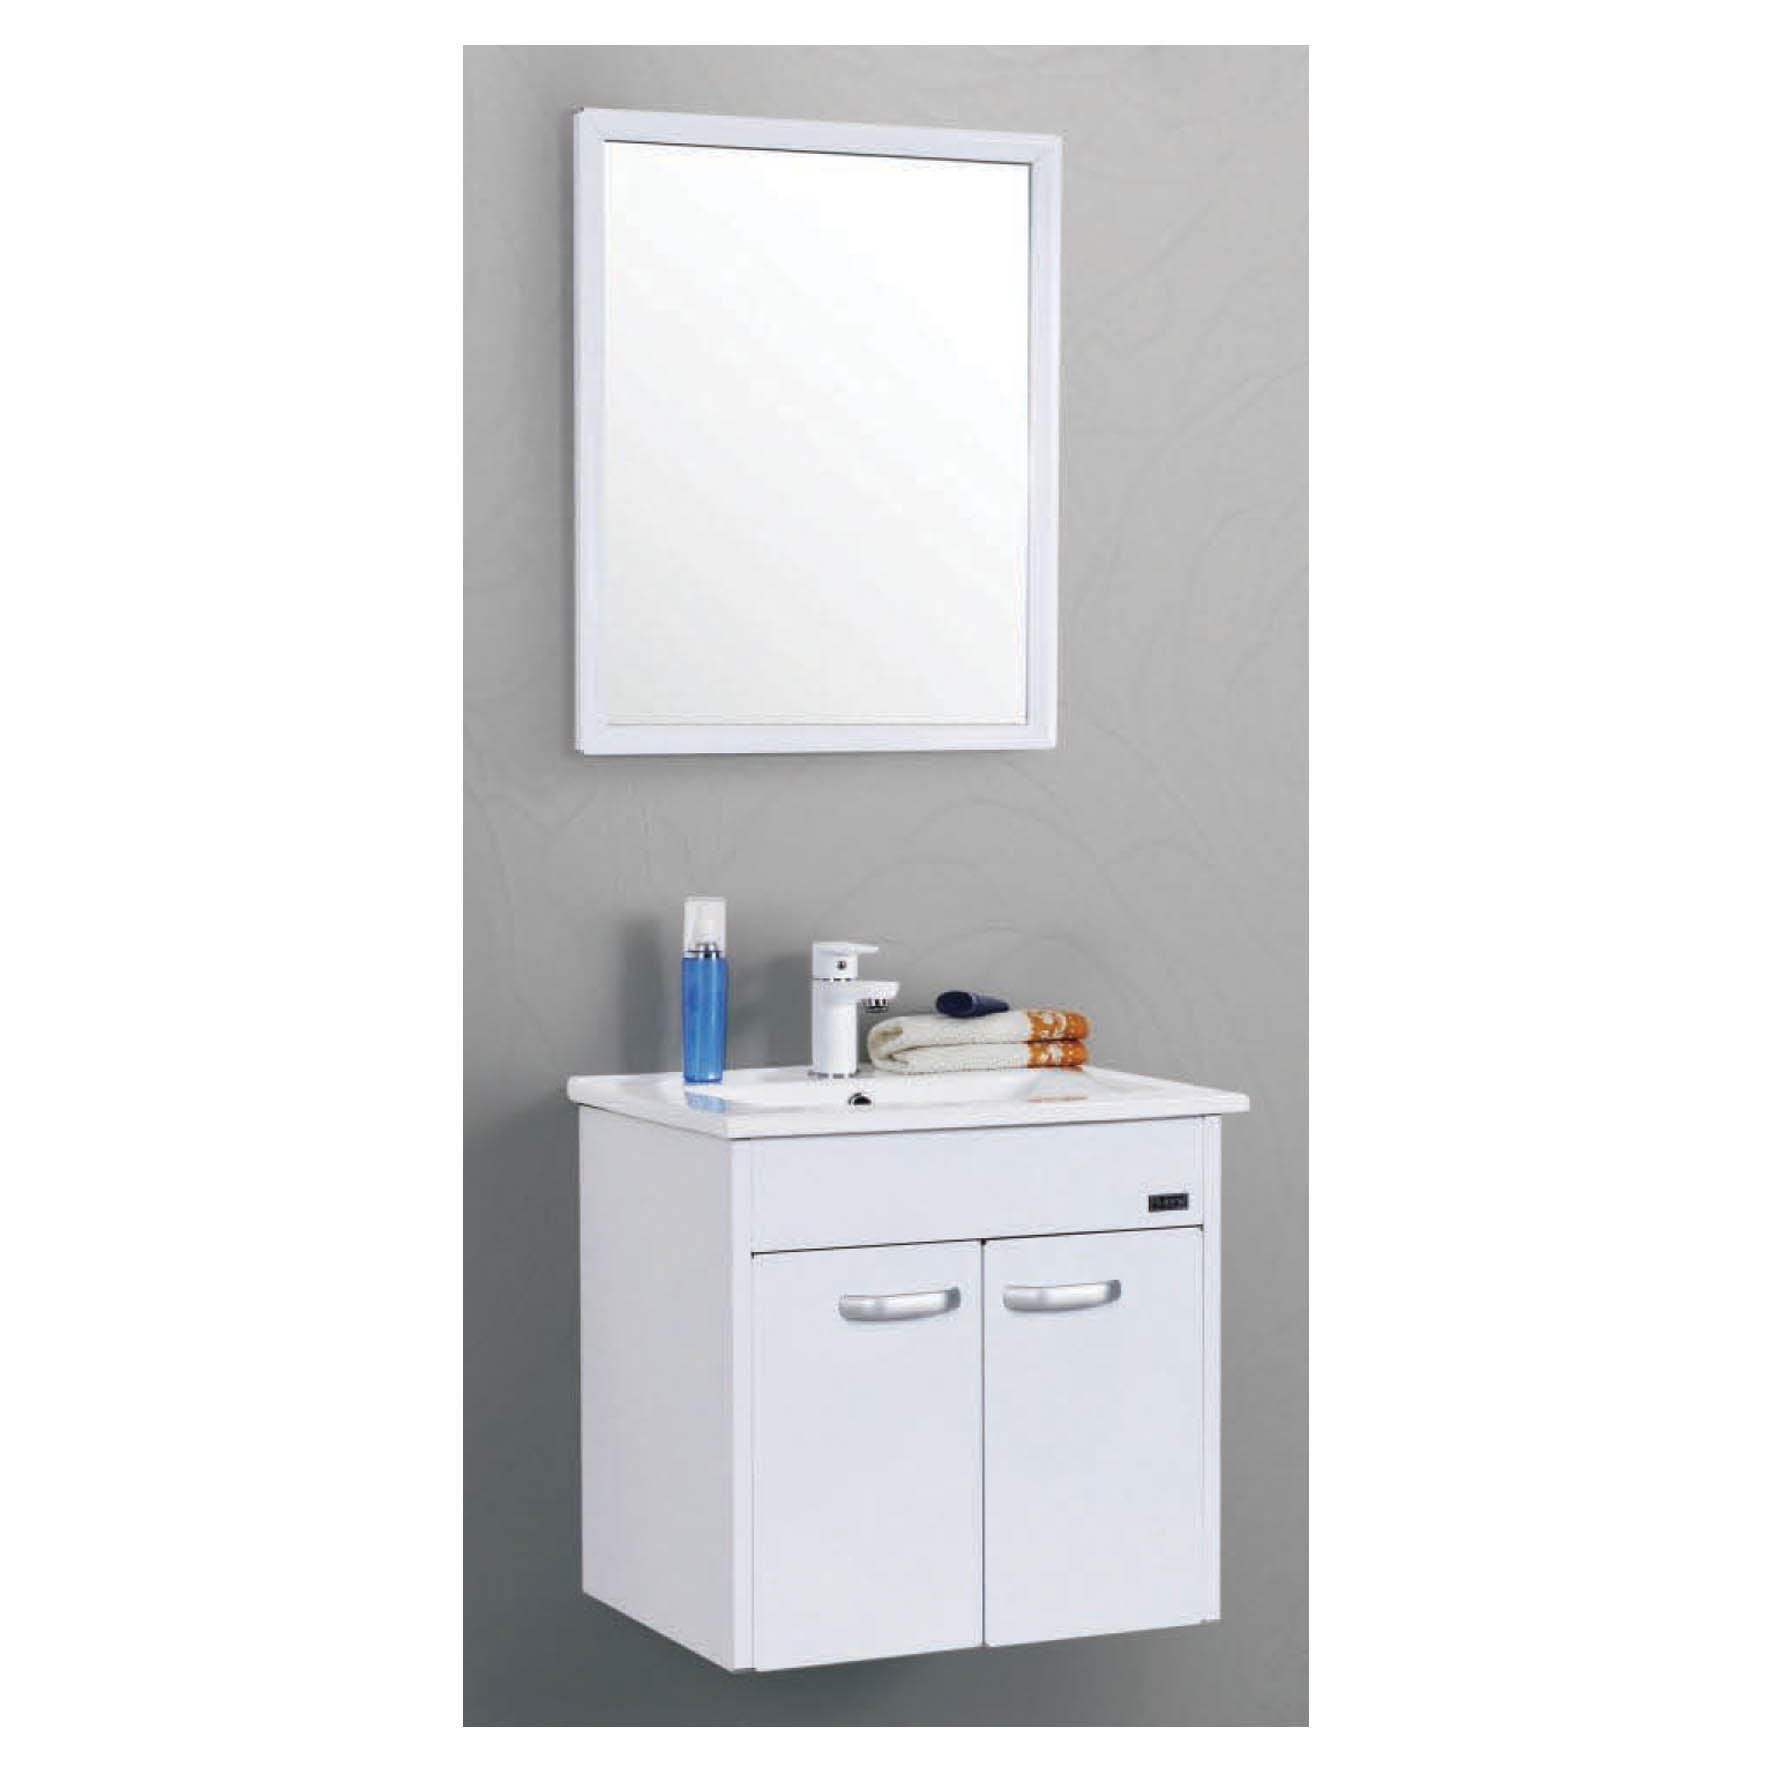 Rubine – Stainless Steel Vanity Cabinet with Built-In Basin – RBF-1054D2-WH